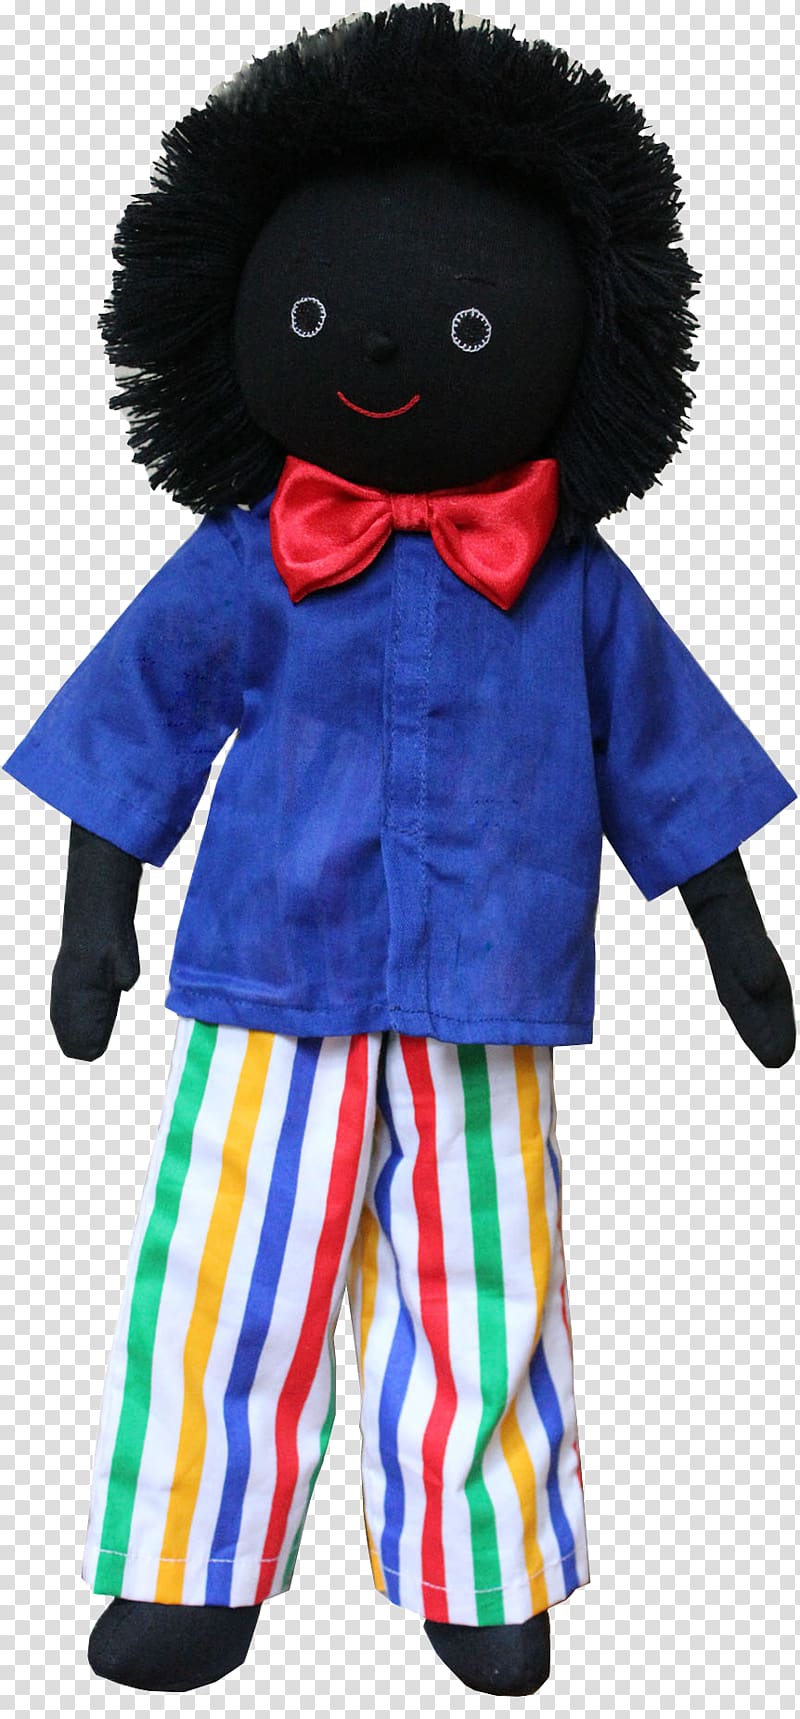 Golliwog Stuffed Animals & Cuddly Toys Doll Merrythought, doll transparent background PNG clipart